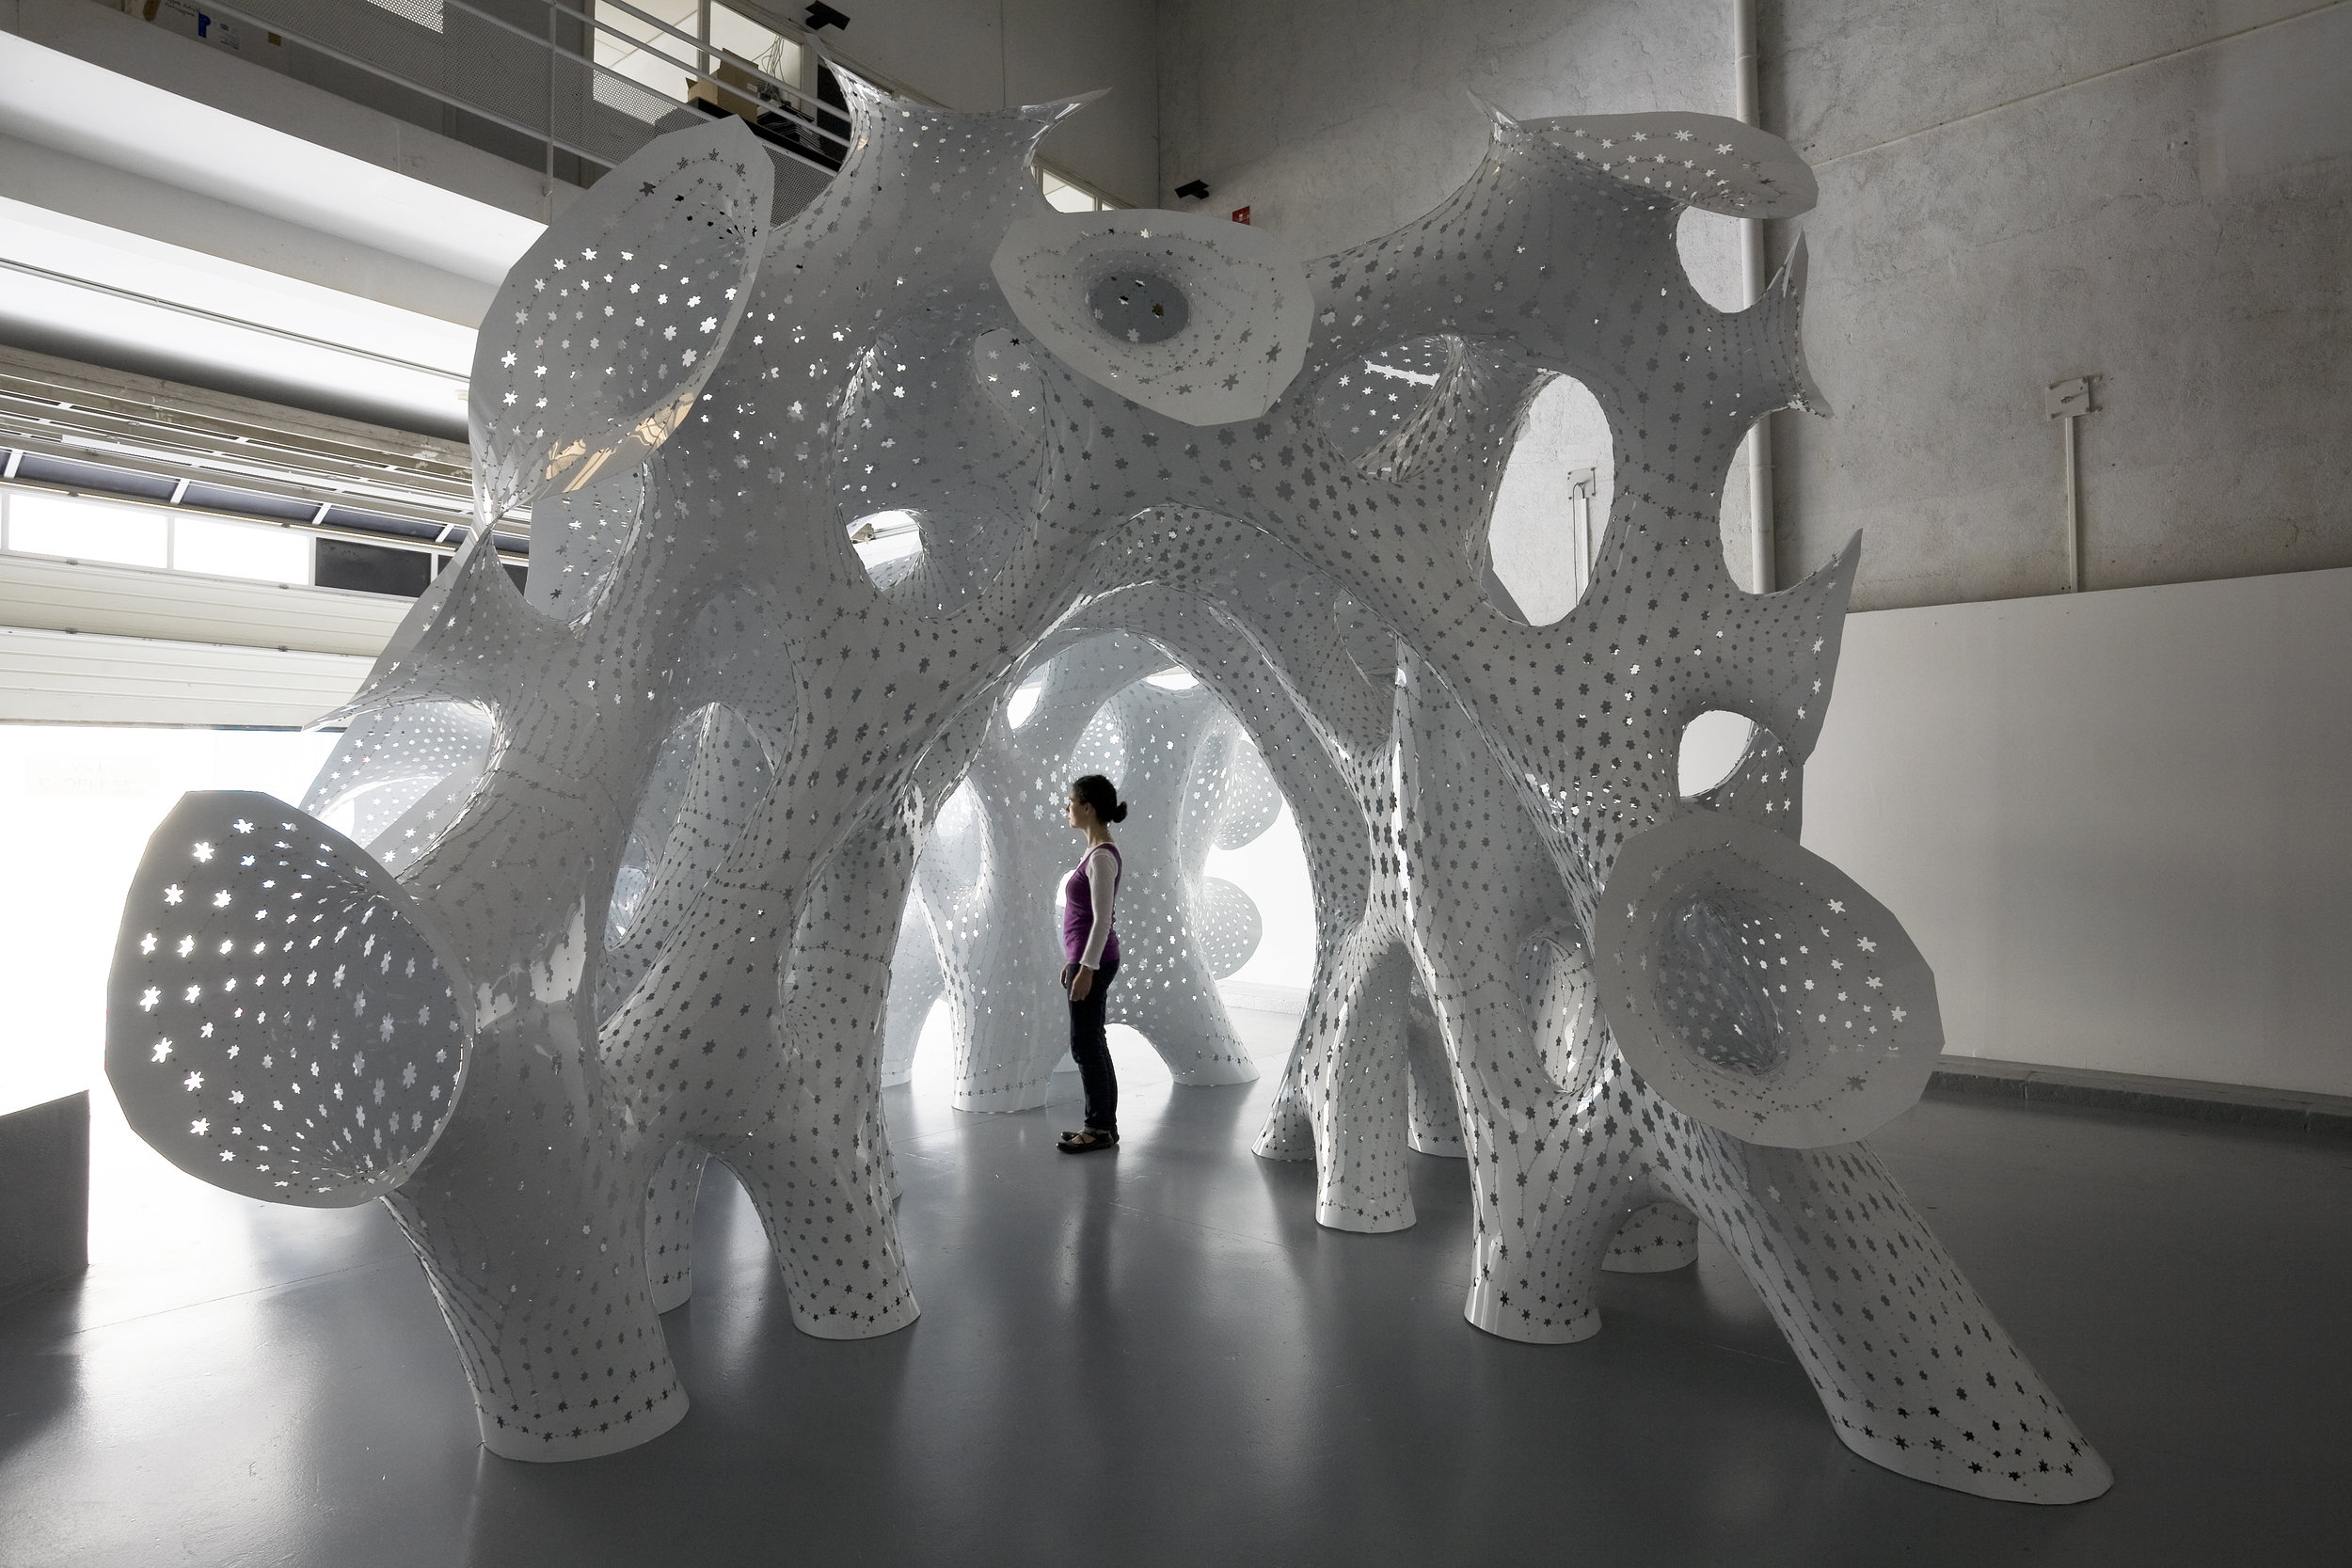 MARC FORNES/THEVERYMANY Creates Two Sculptural Installations In France